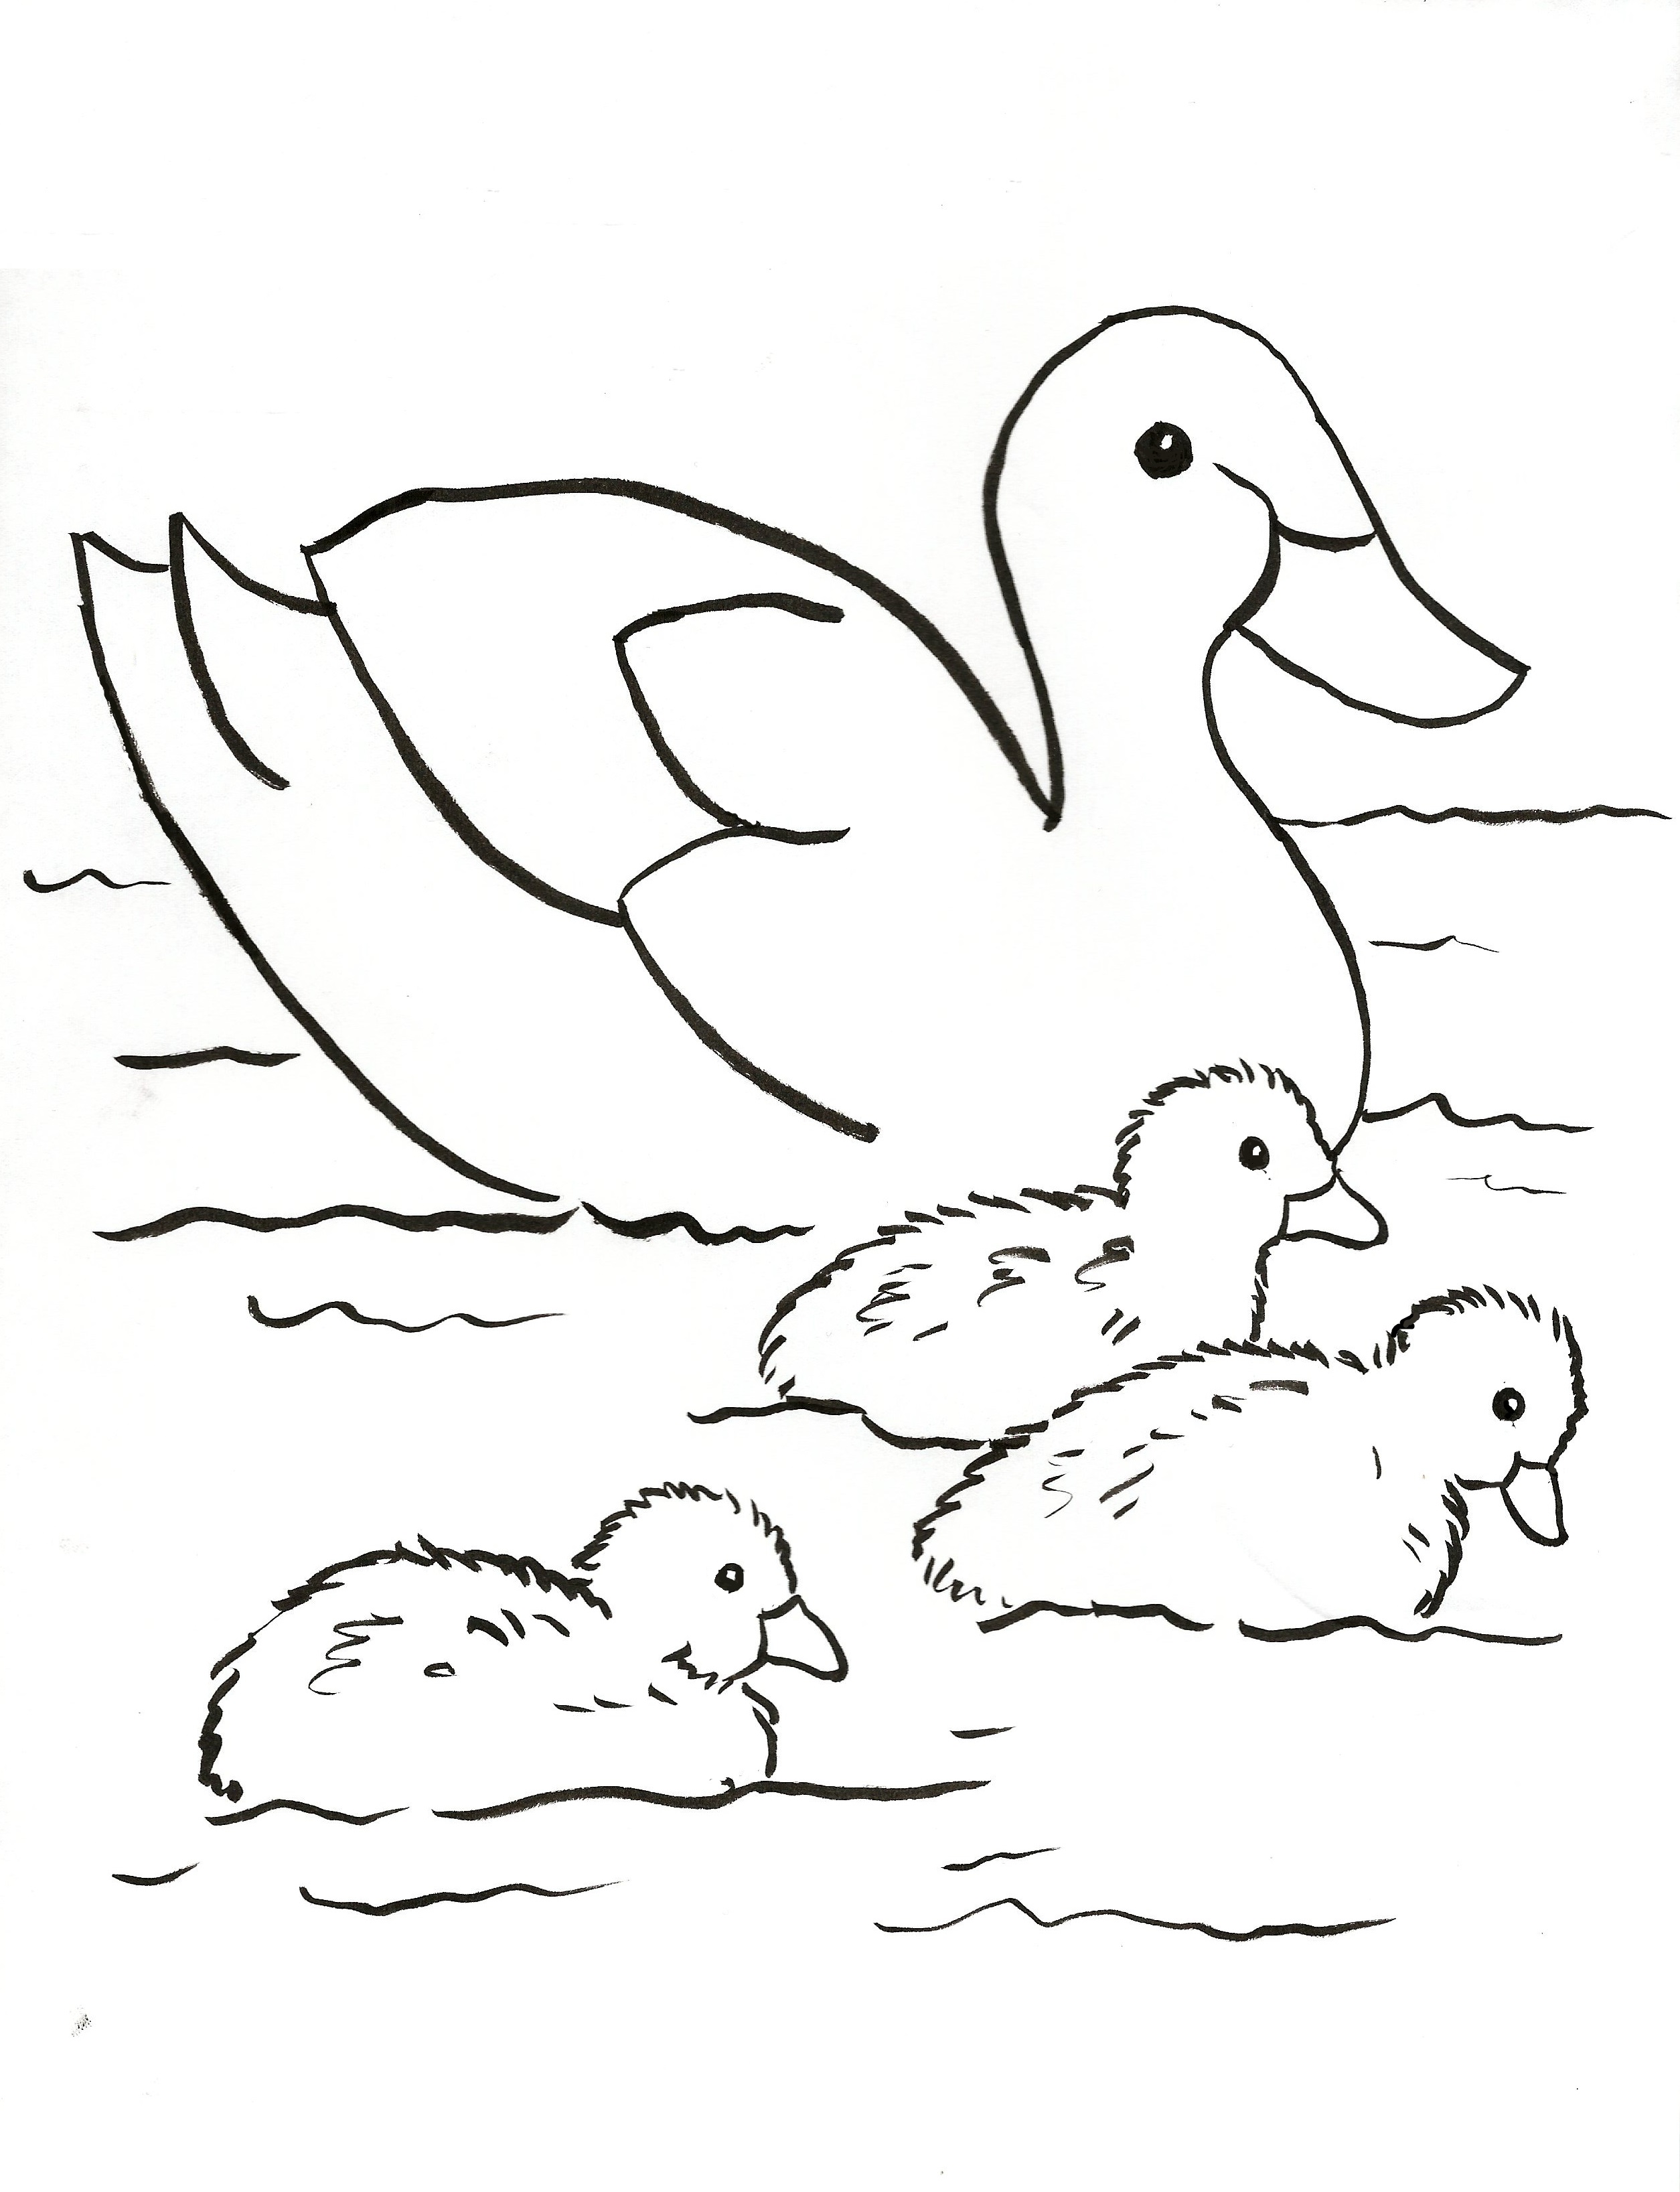 Duck Family Coloring Page Samantha Bell